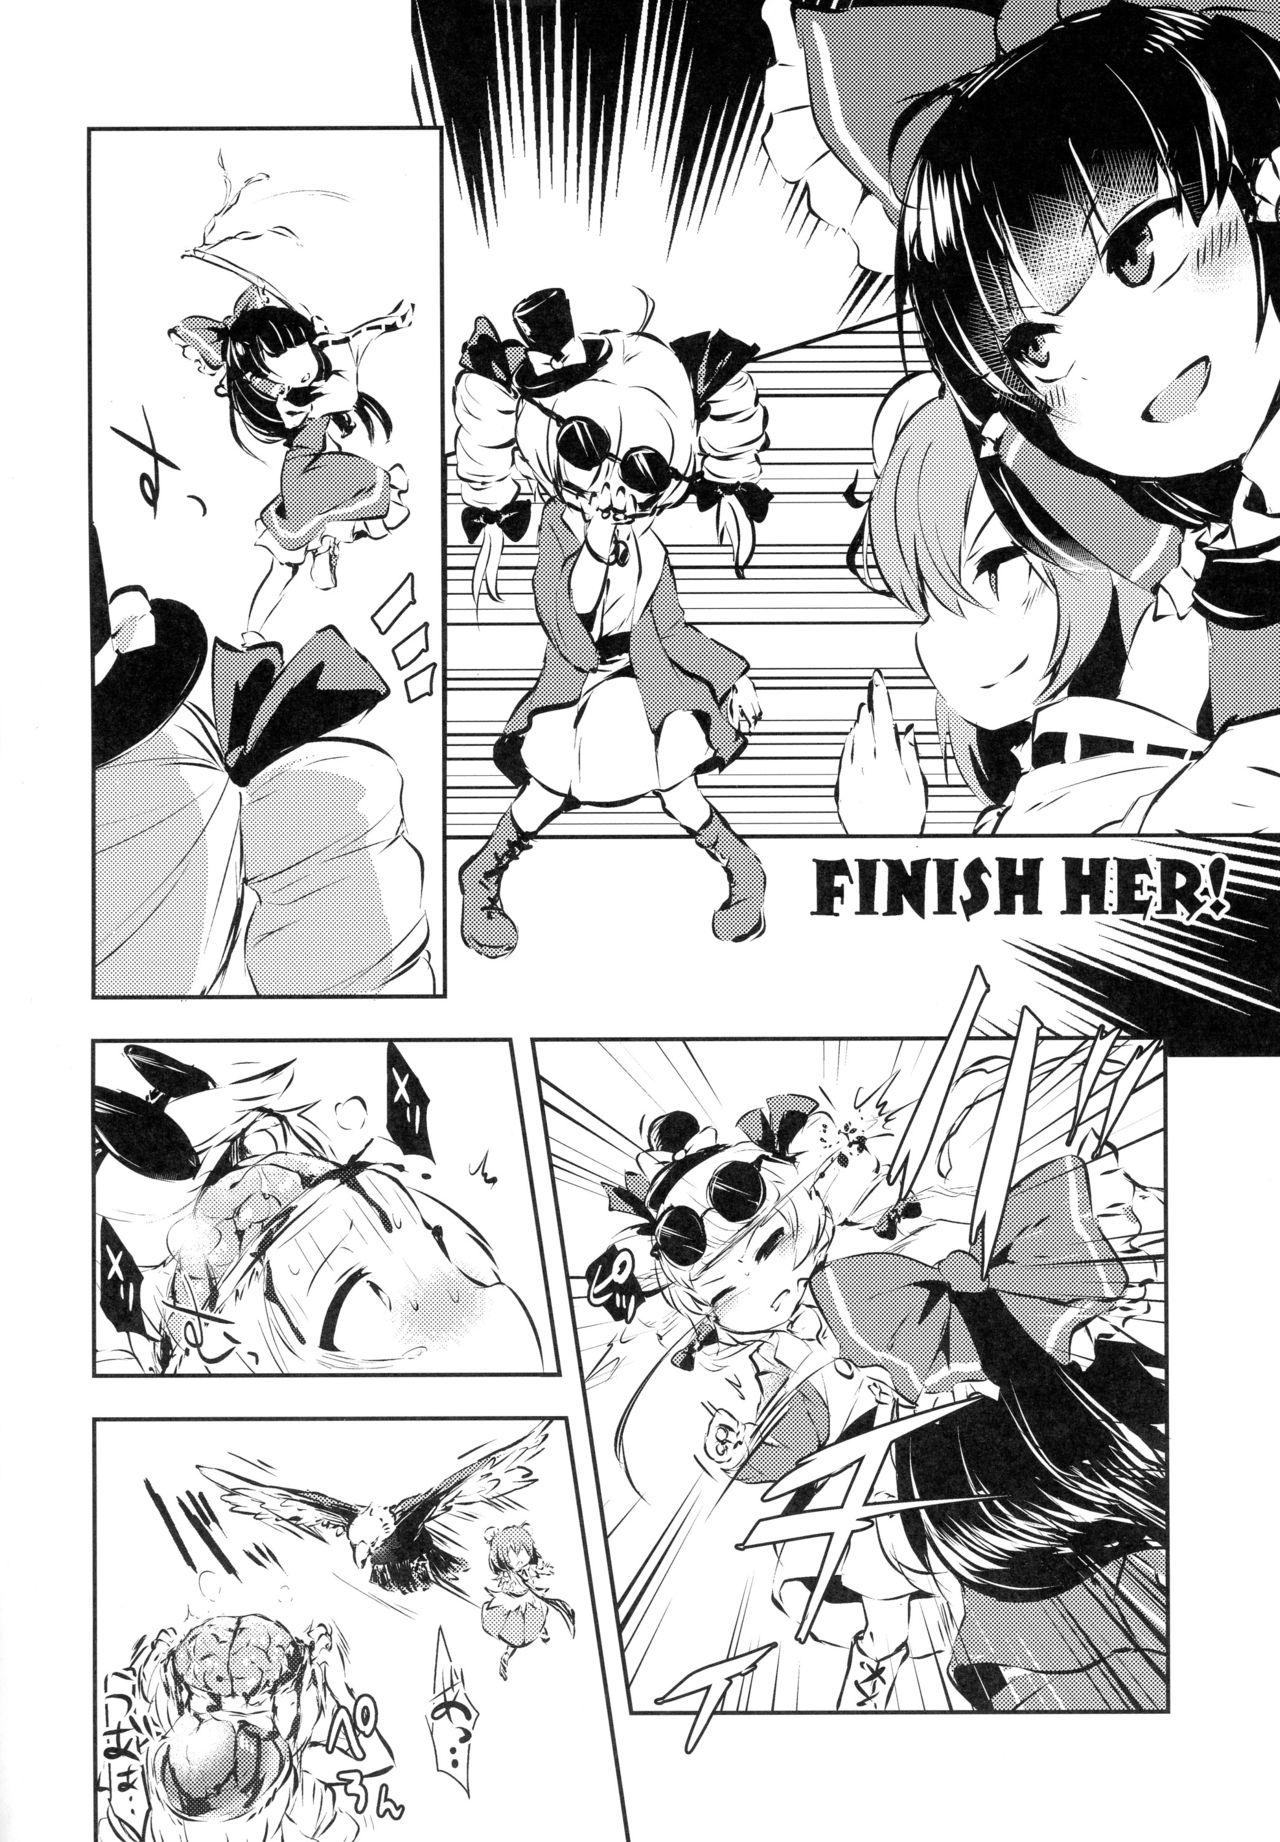 Flagra AURA POSSESSION'S FATALITIES - Touhou project Caseiro - Page 4